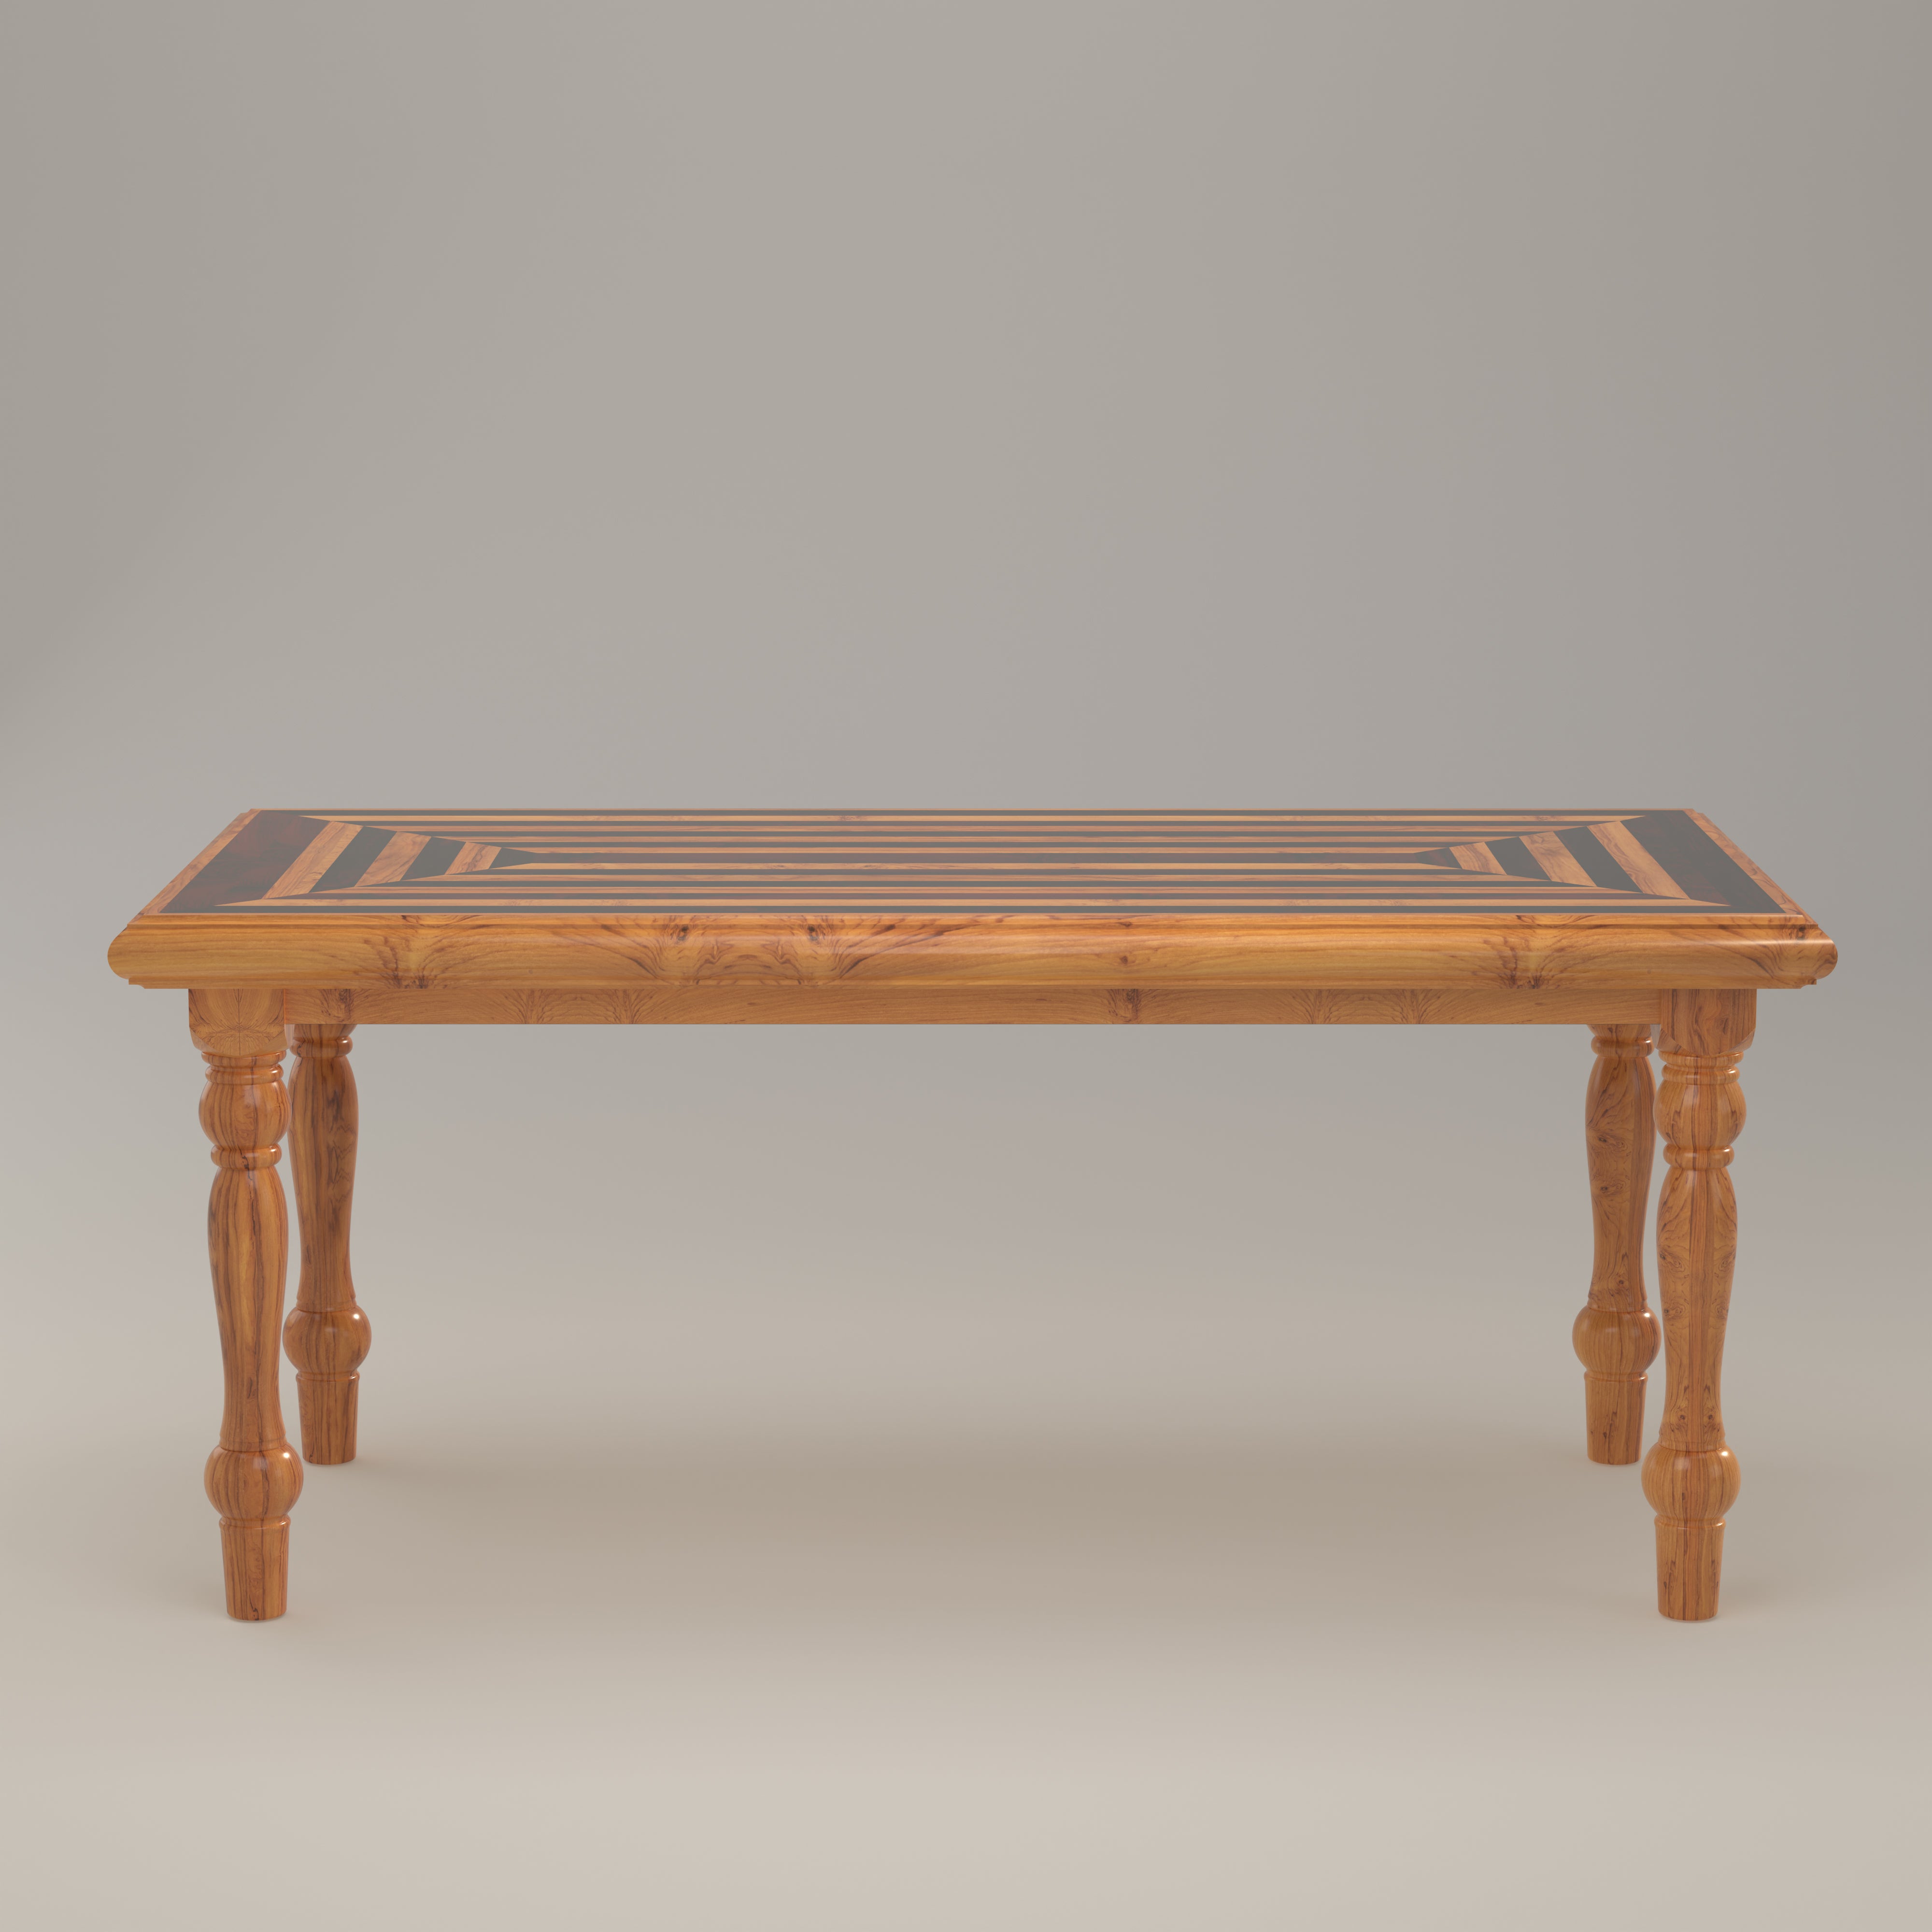 Unique Top Reverse Handmade Designed Antique Wooden Dining Table Dining Table